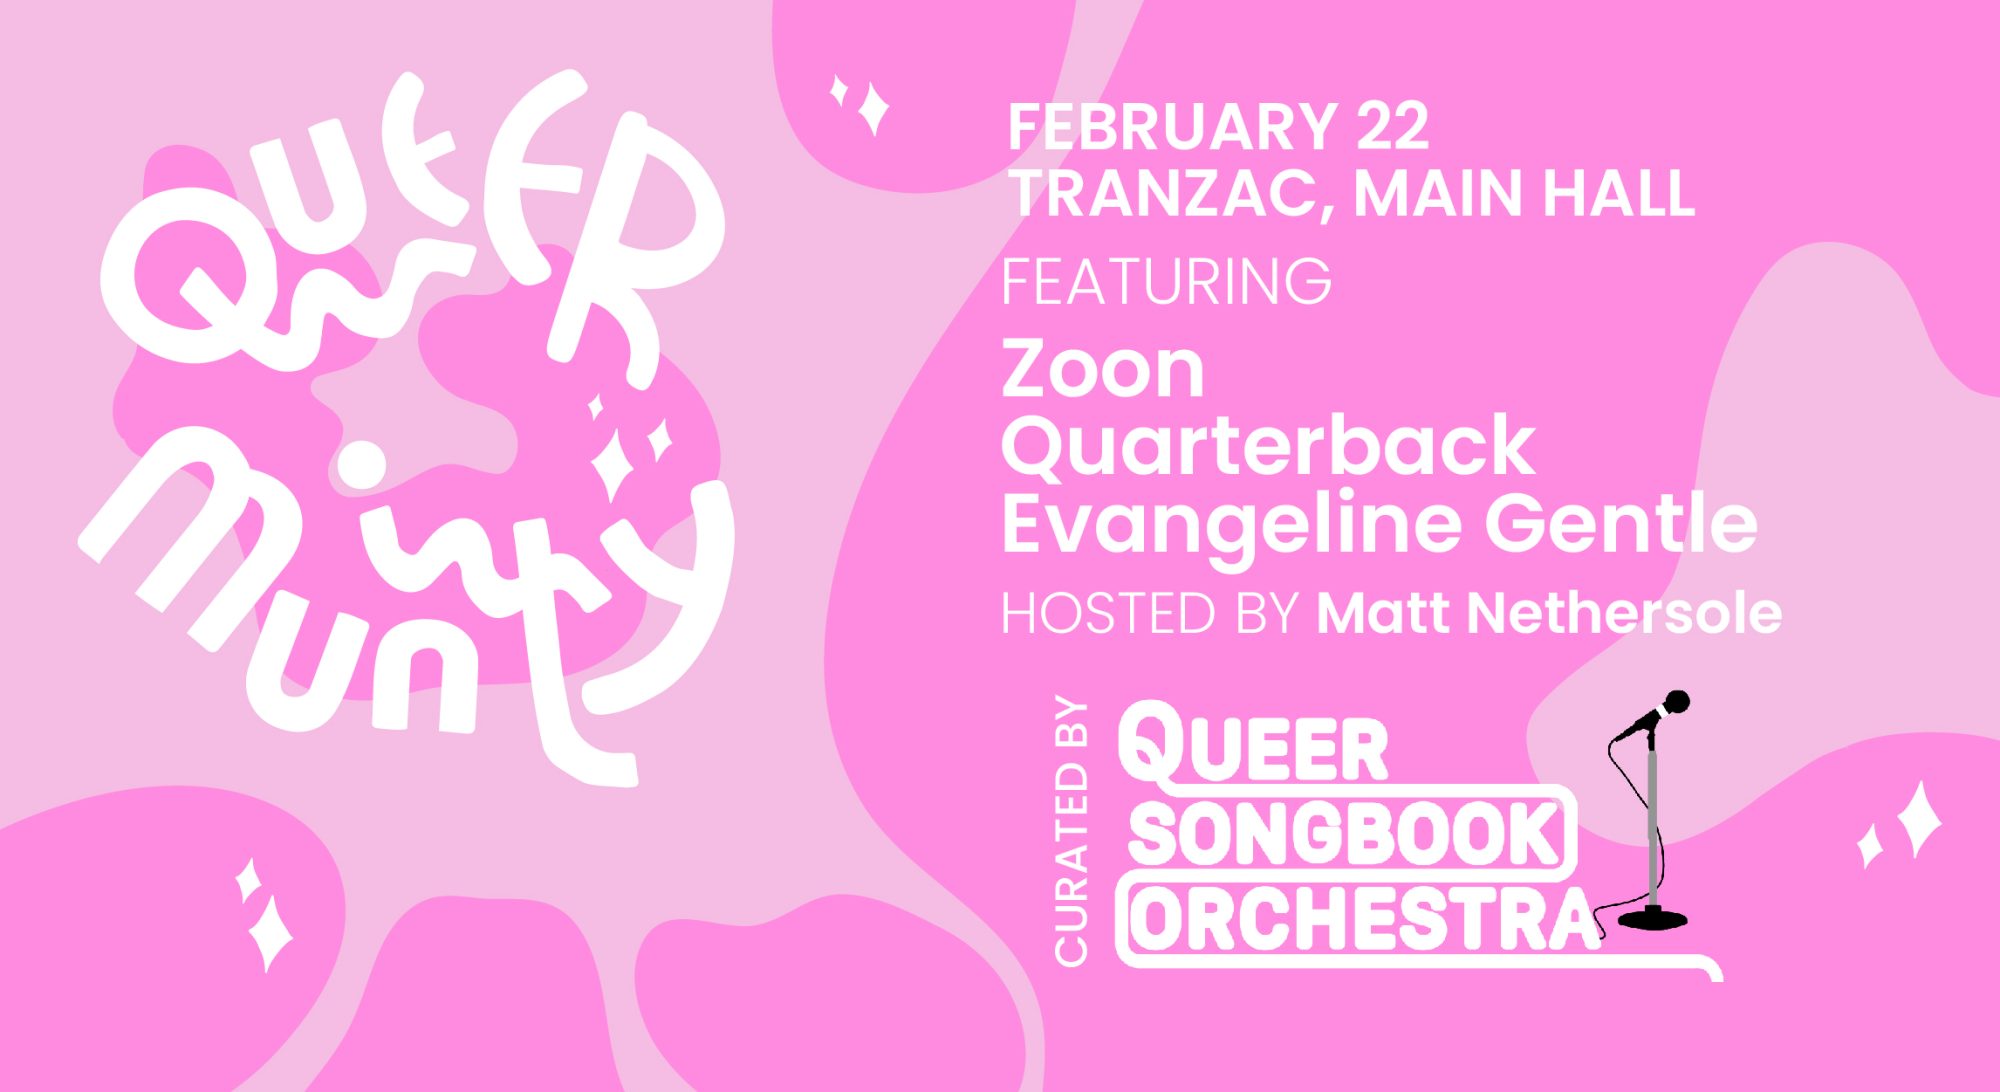 Queermunity / Curated by the Queer Songbook Orchestra, February 22, 2023 at the Tranzac Main Hall